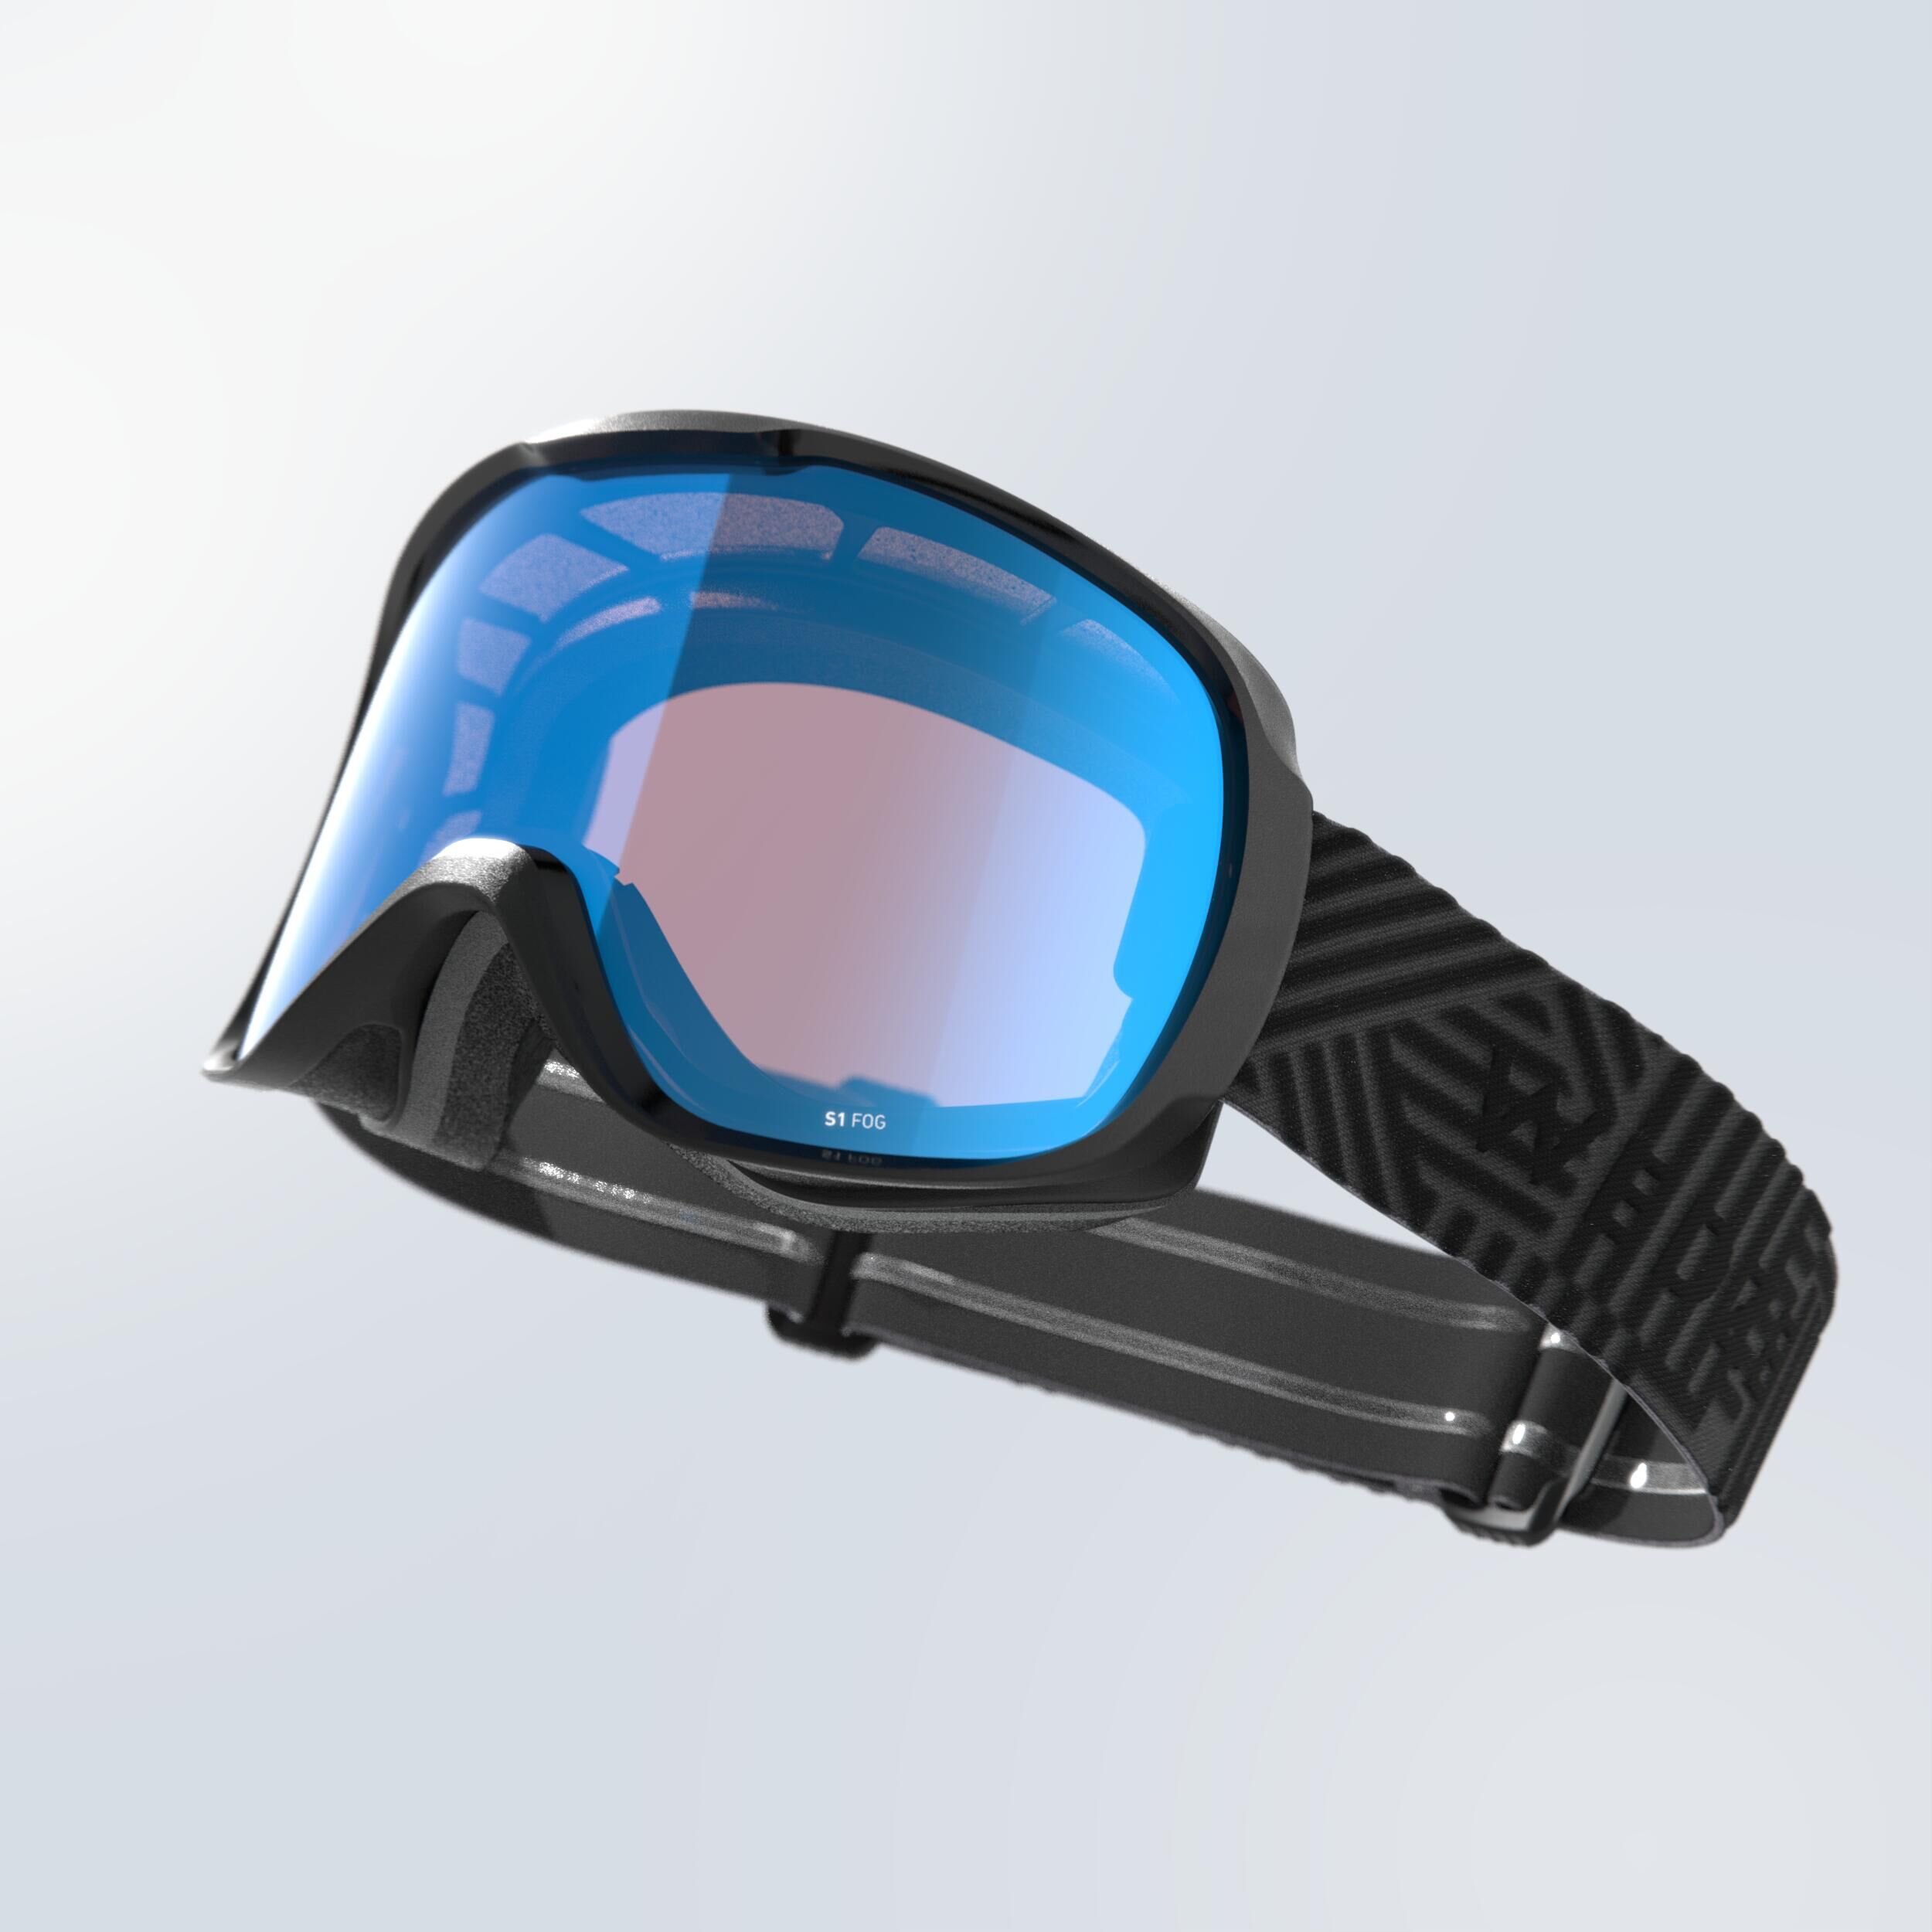 WEDZE KIDS’ AND ADULT SKIING AND SNOWBOARDING GOGGLES BAD WEATHER - G 500 S1 - BLACK